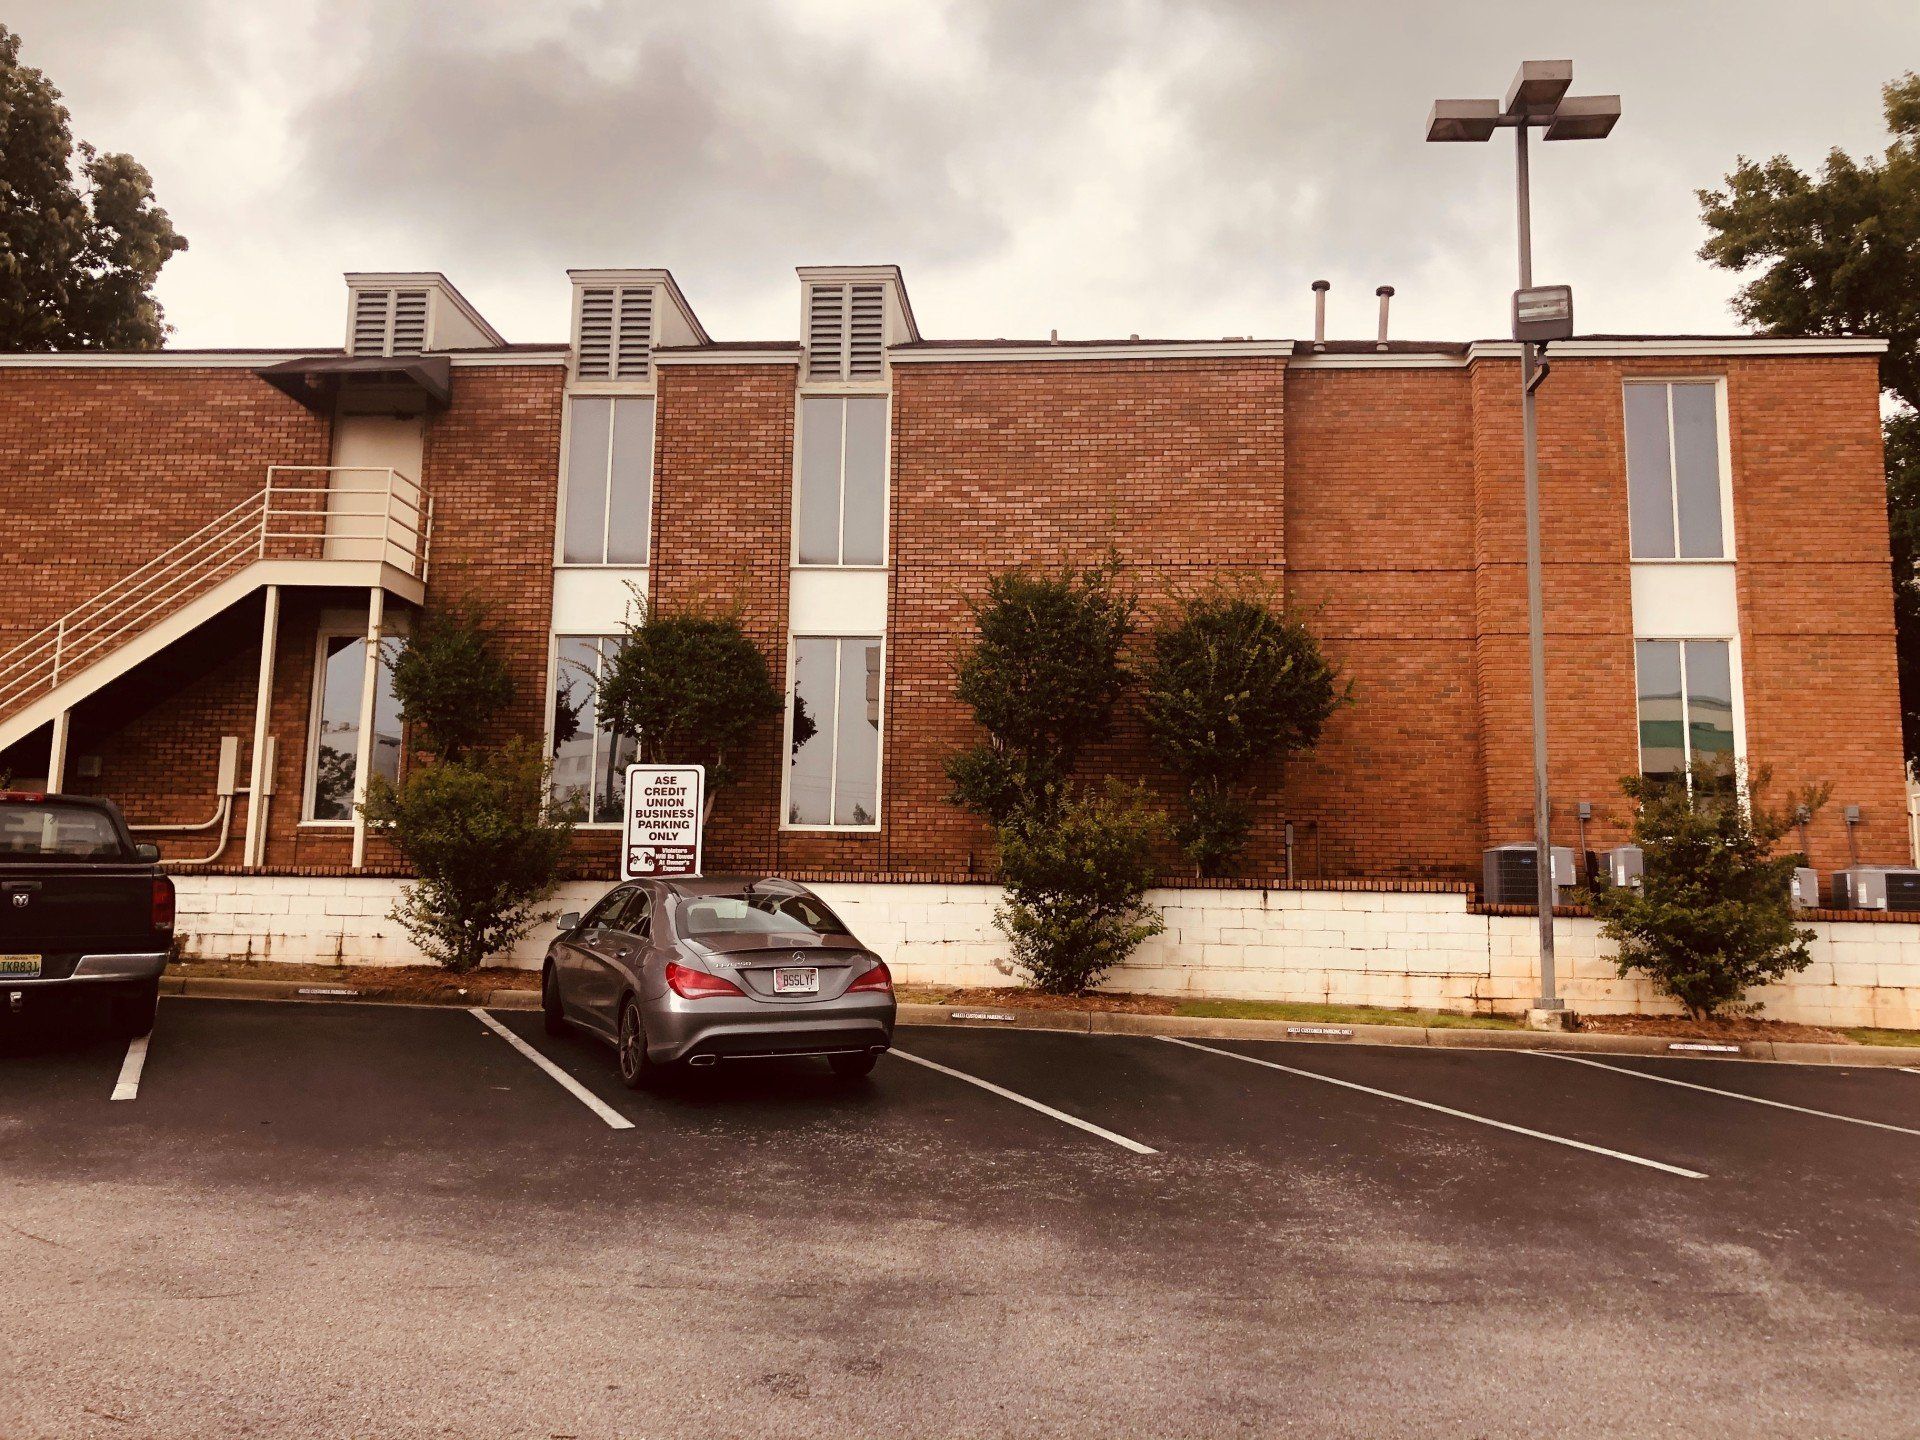 office tint in Montgomery AL - SPF Leading Tint allowed for an open view while blocking OVER 90% Heat & Glare from entering through the glass on 6.9.2020 in Montgomery, AL